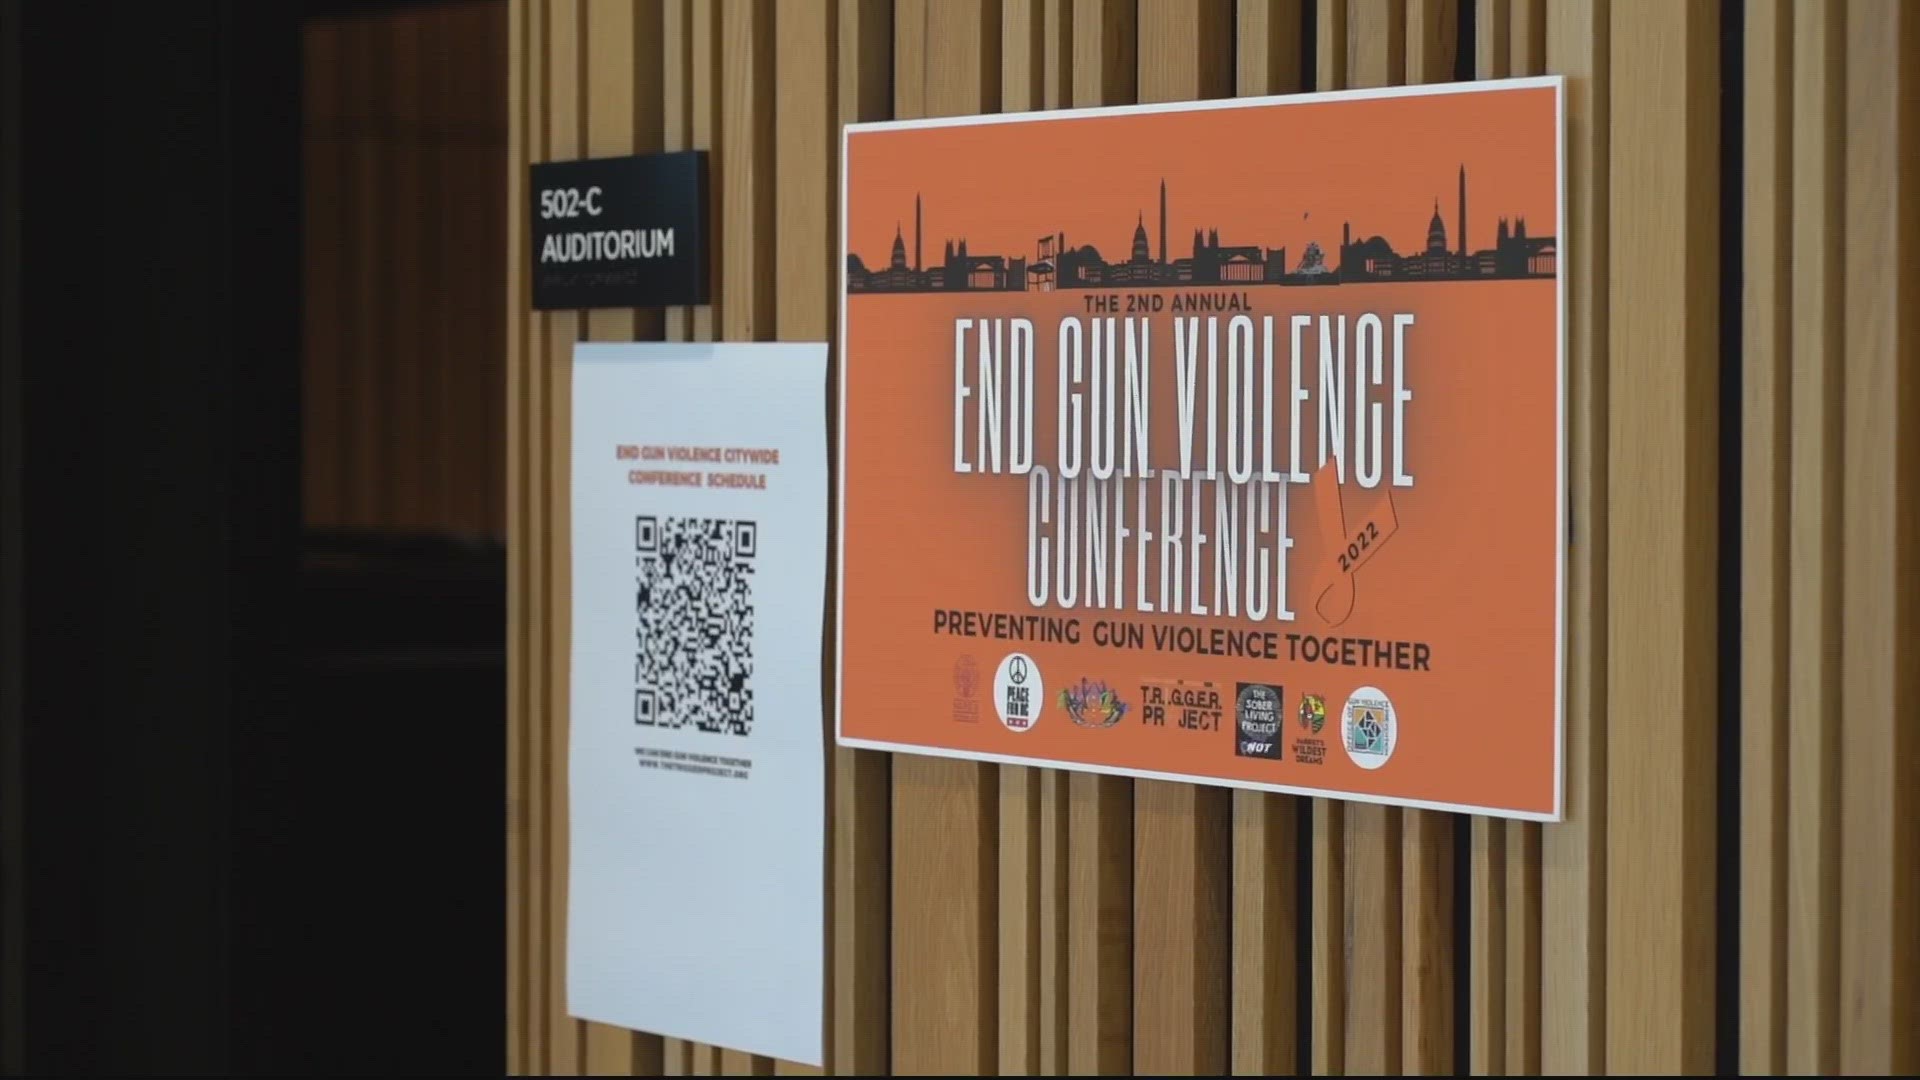 The conference is called a city-wide day of action to turn the tide on gun violence in the DMV.